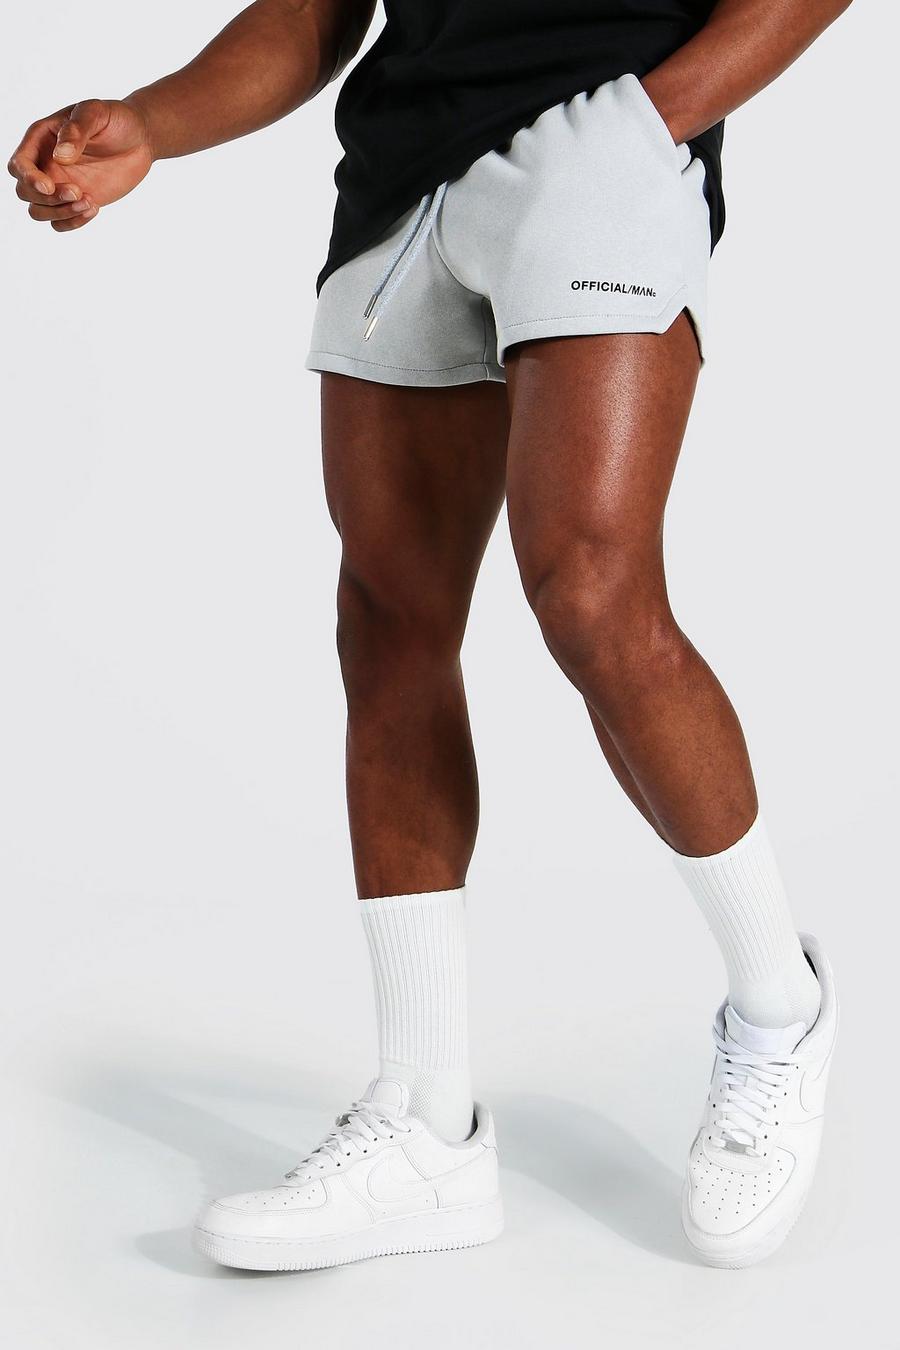 Stone Short Length Official Man Volley Jersey Short image number 1